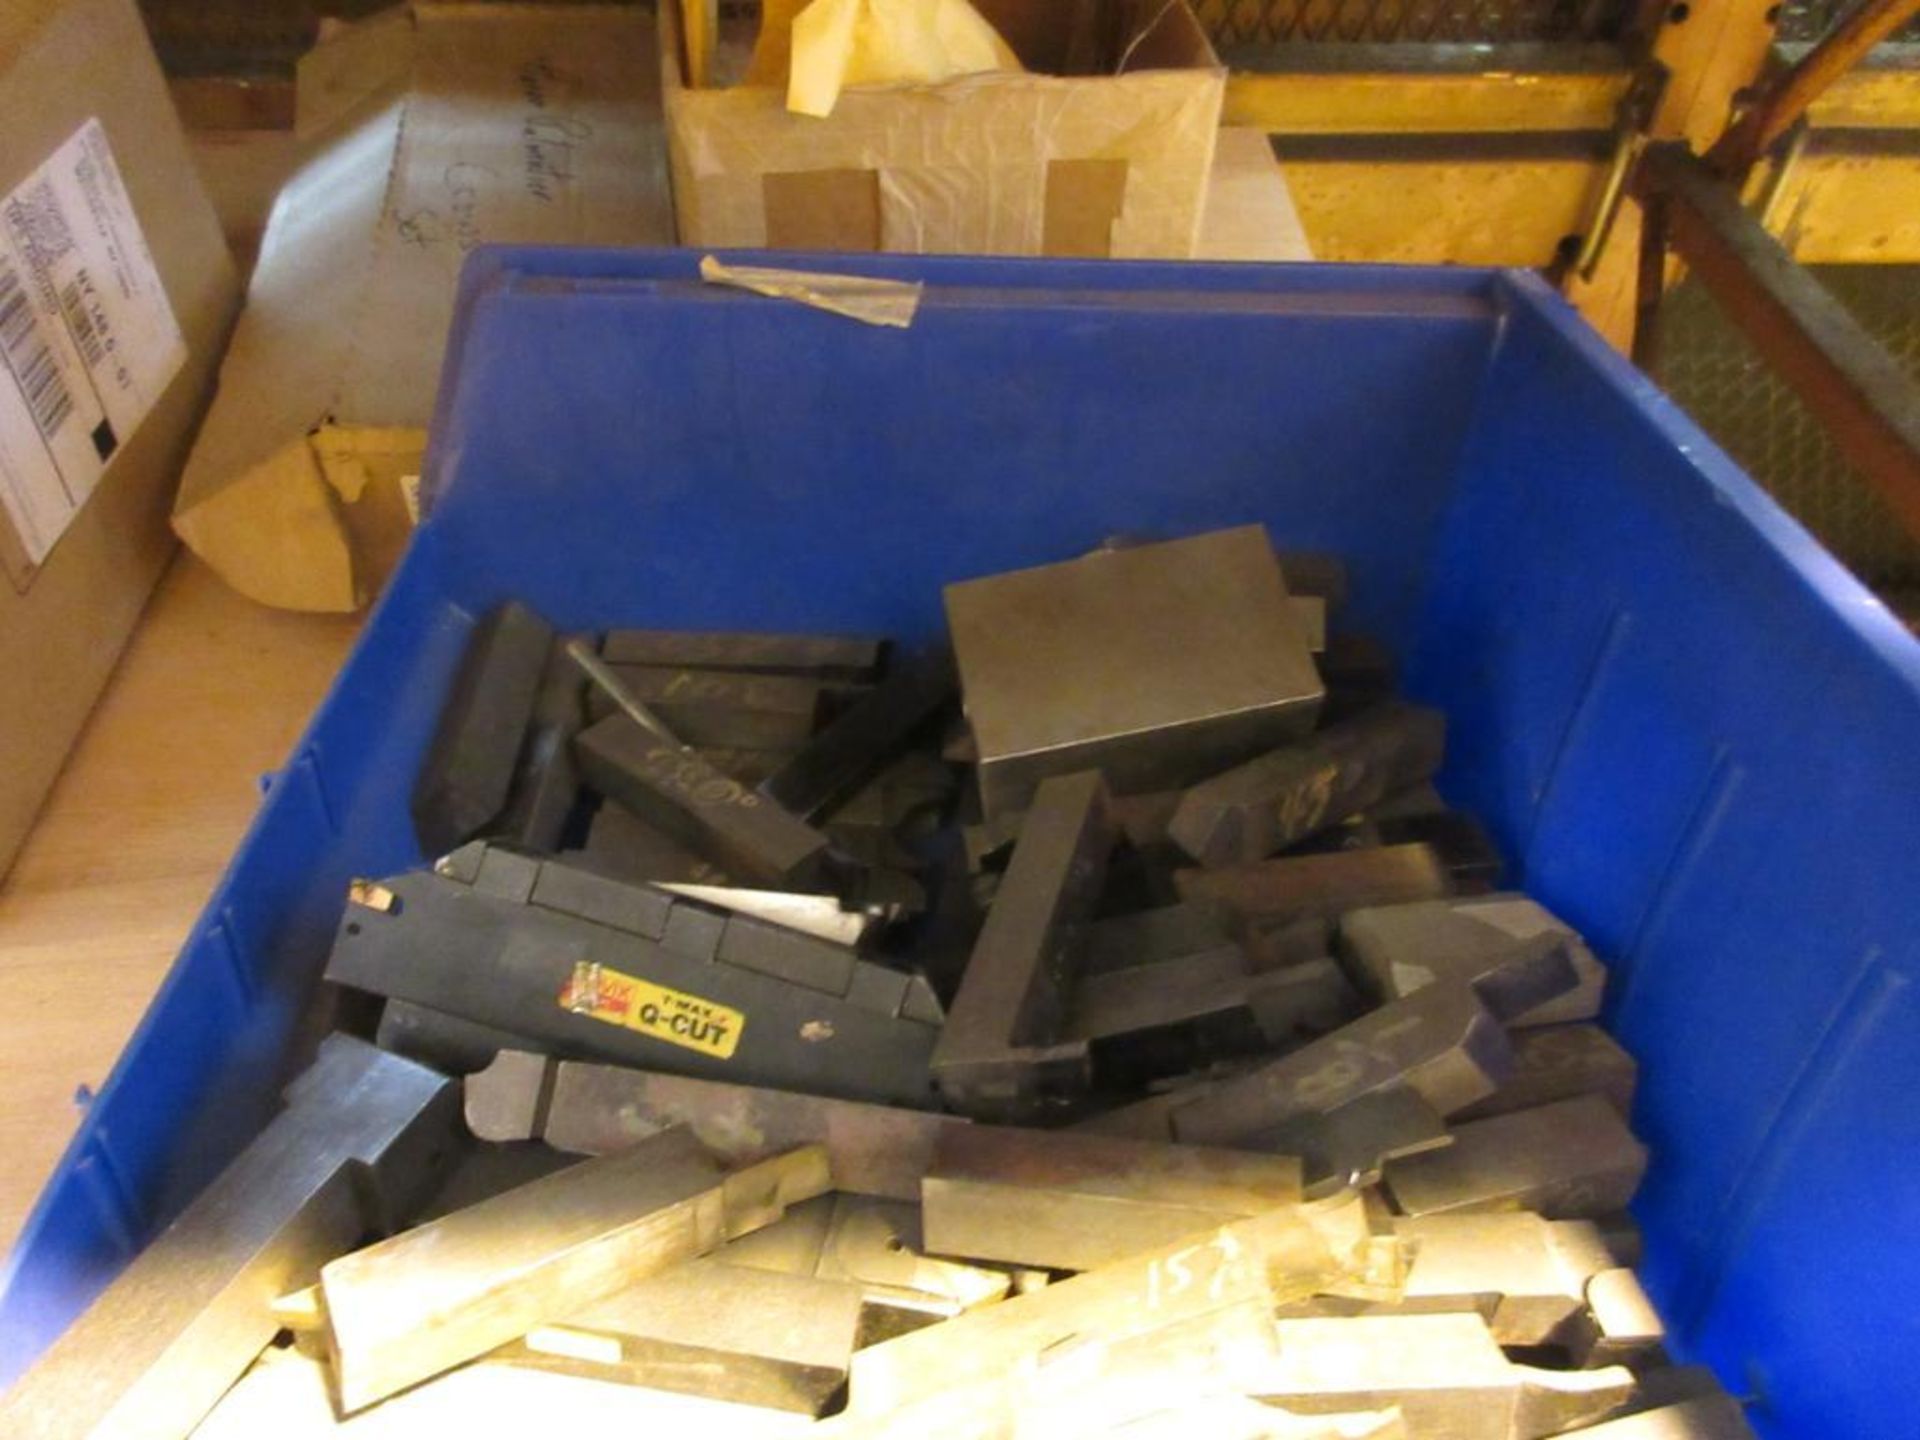 CONTENTS OF (22) SECTIONS PALLET RACK: ASSORTED ABRASIVES, SUNNEN STONES, TOOL BITS, DOVETAIL CUTTER - Image 16 of 43